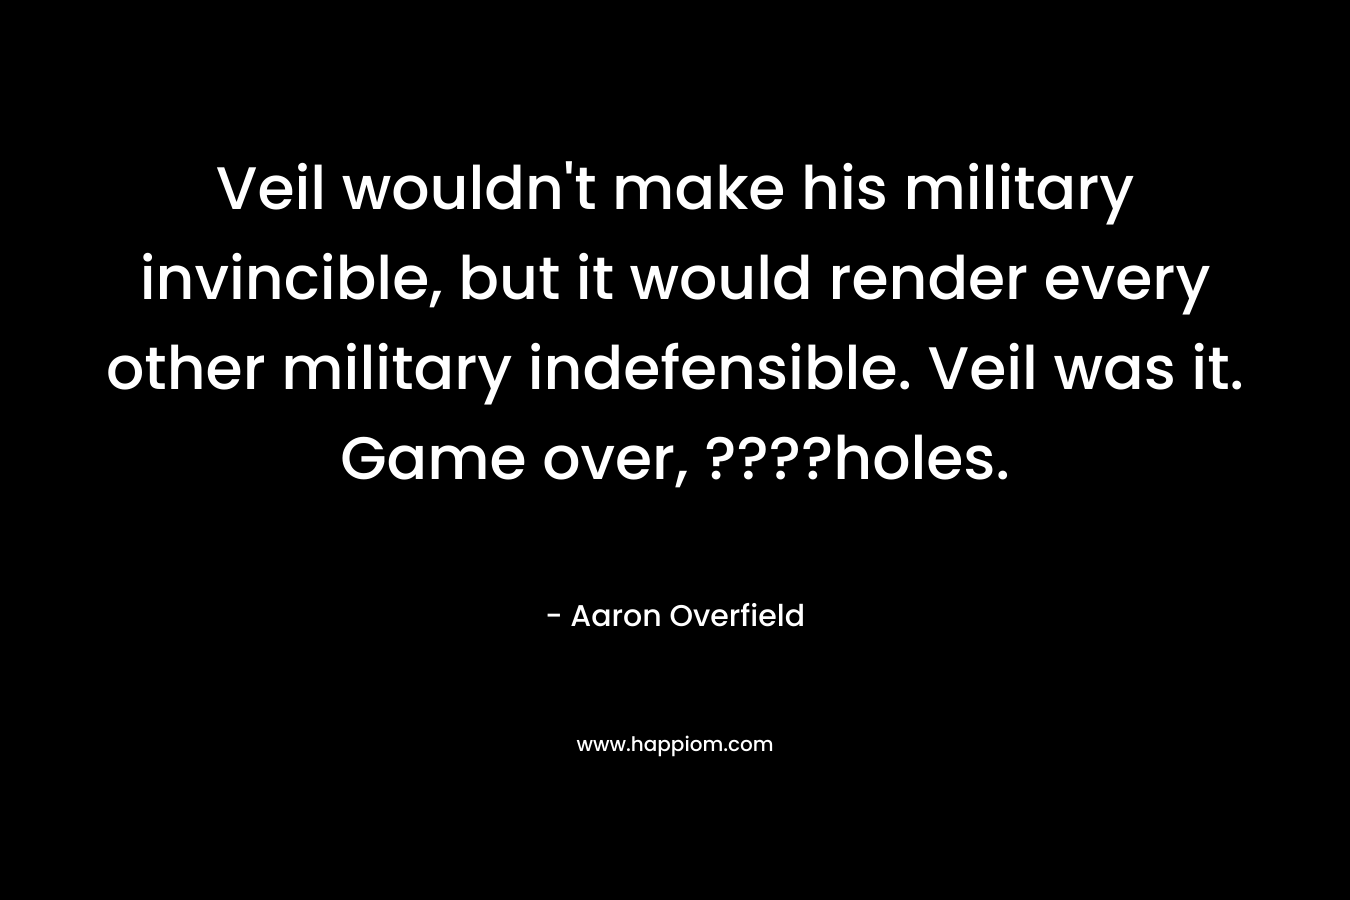 Veil wouldn't make his military invincible, but it would render every other military indefensible. Veil was it. Game over, ????holes.